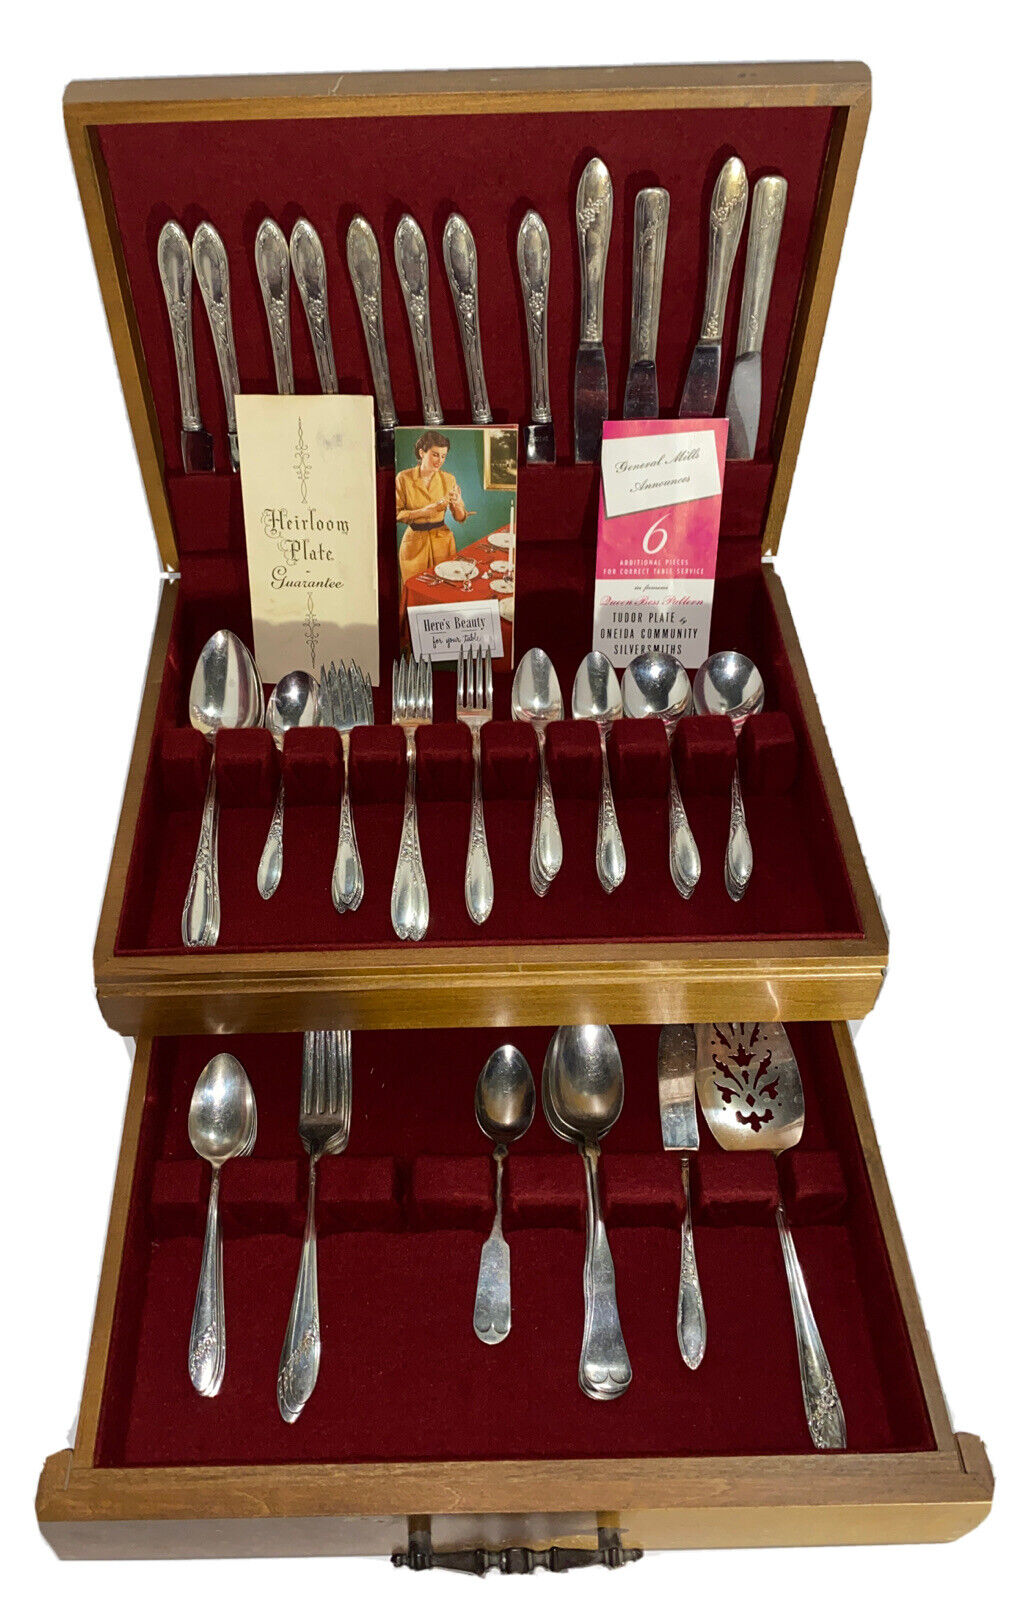 VINTAGE Mixed Silverware Set TUDOR PLATE QUEEN BESS, HEIRLOOM PLATE CHATEAU Box